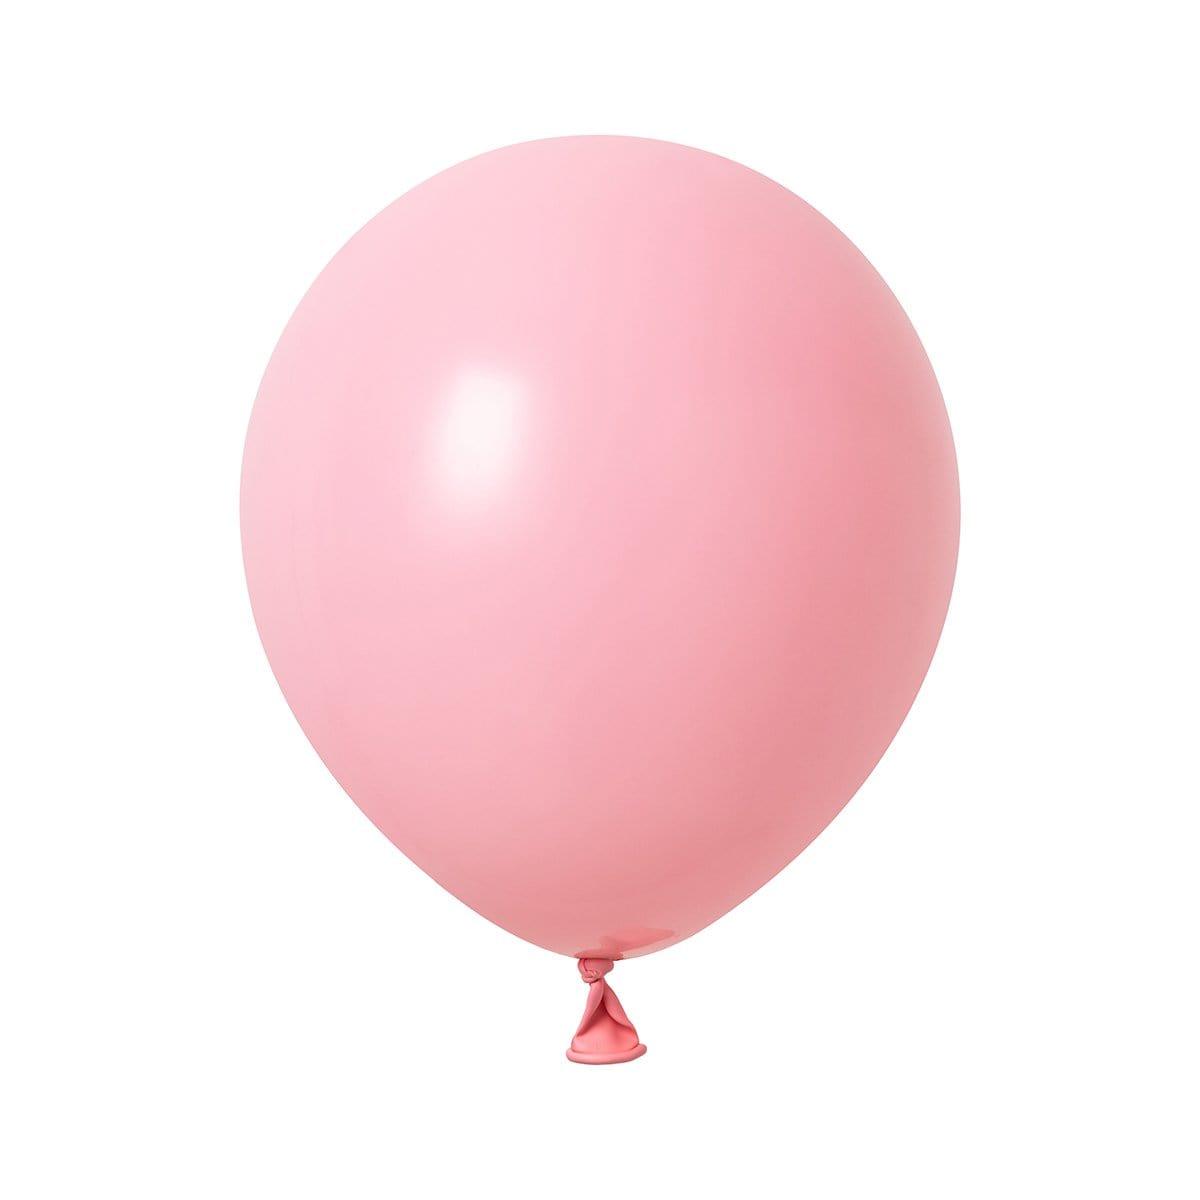 Buy Balloons Baby pink Latex Balloon 12 Inches, 72 Count sold at Party Expert